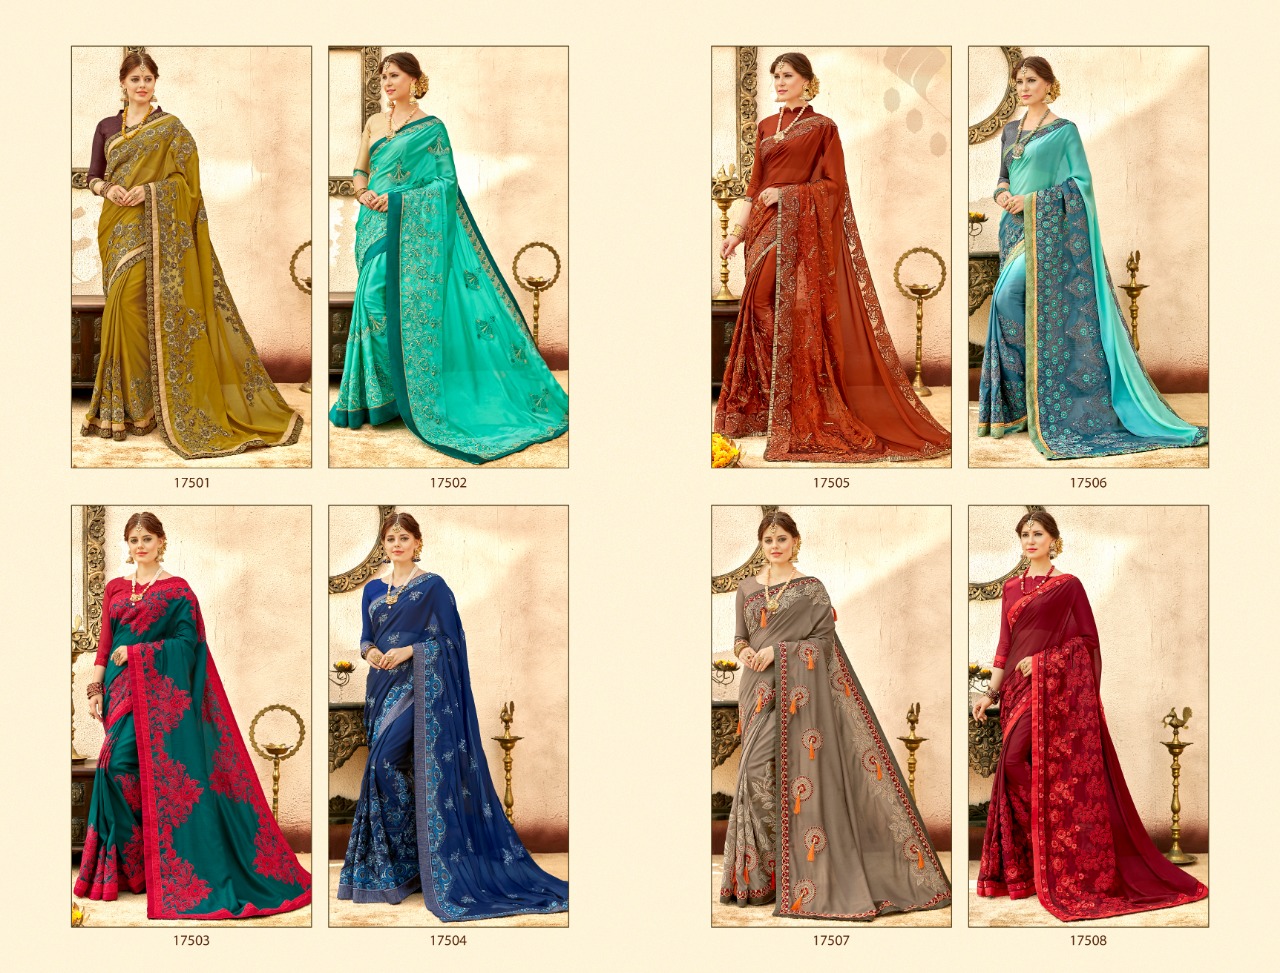 triveni angels colorful designer collection of sarees at reasonable rate